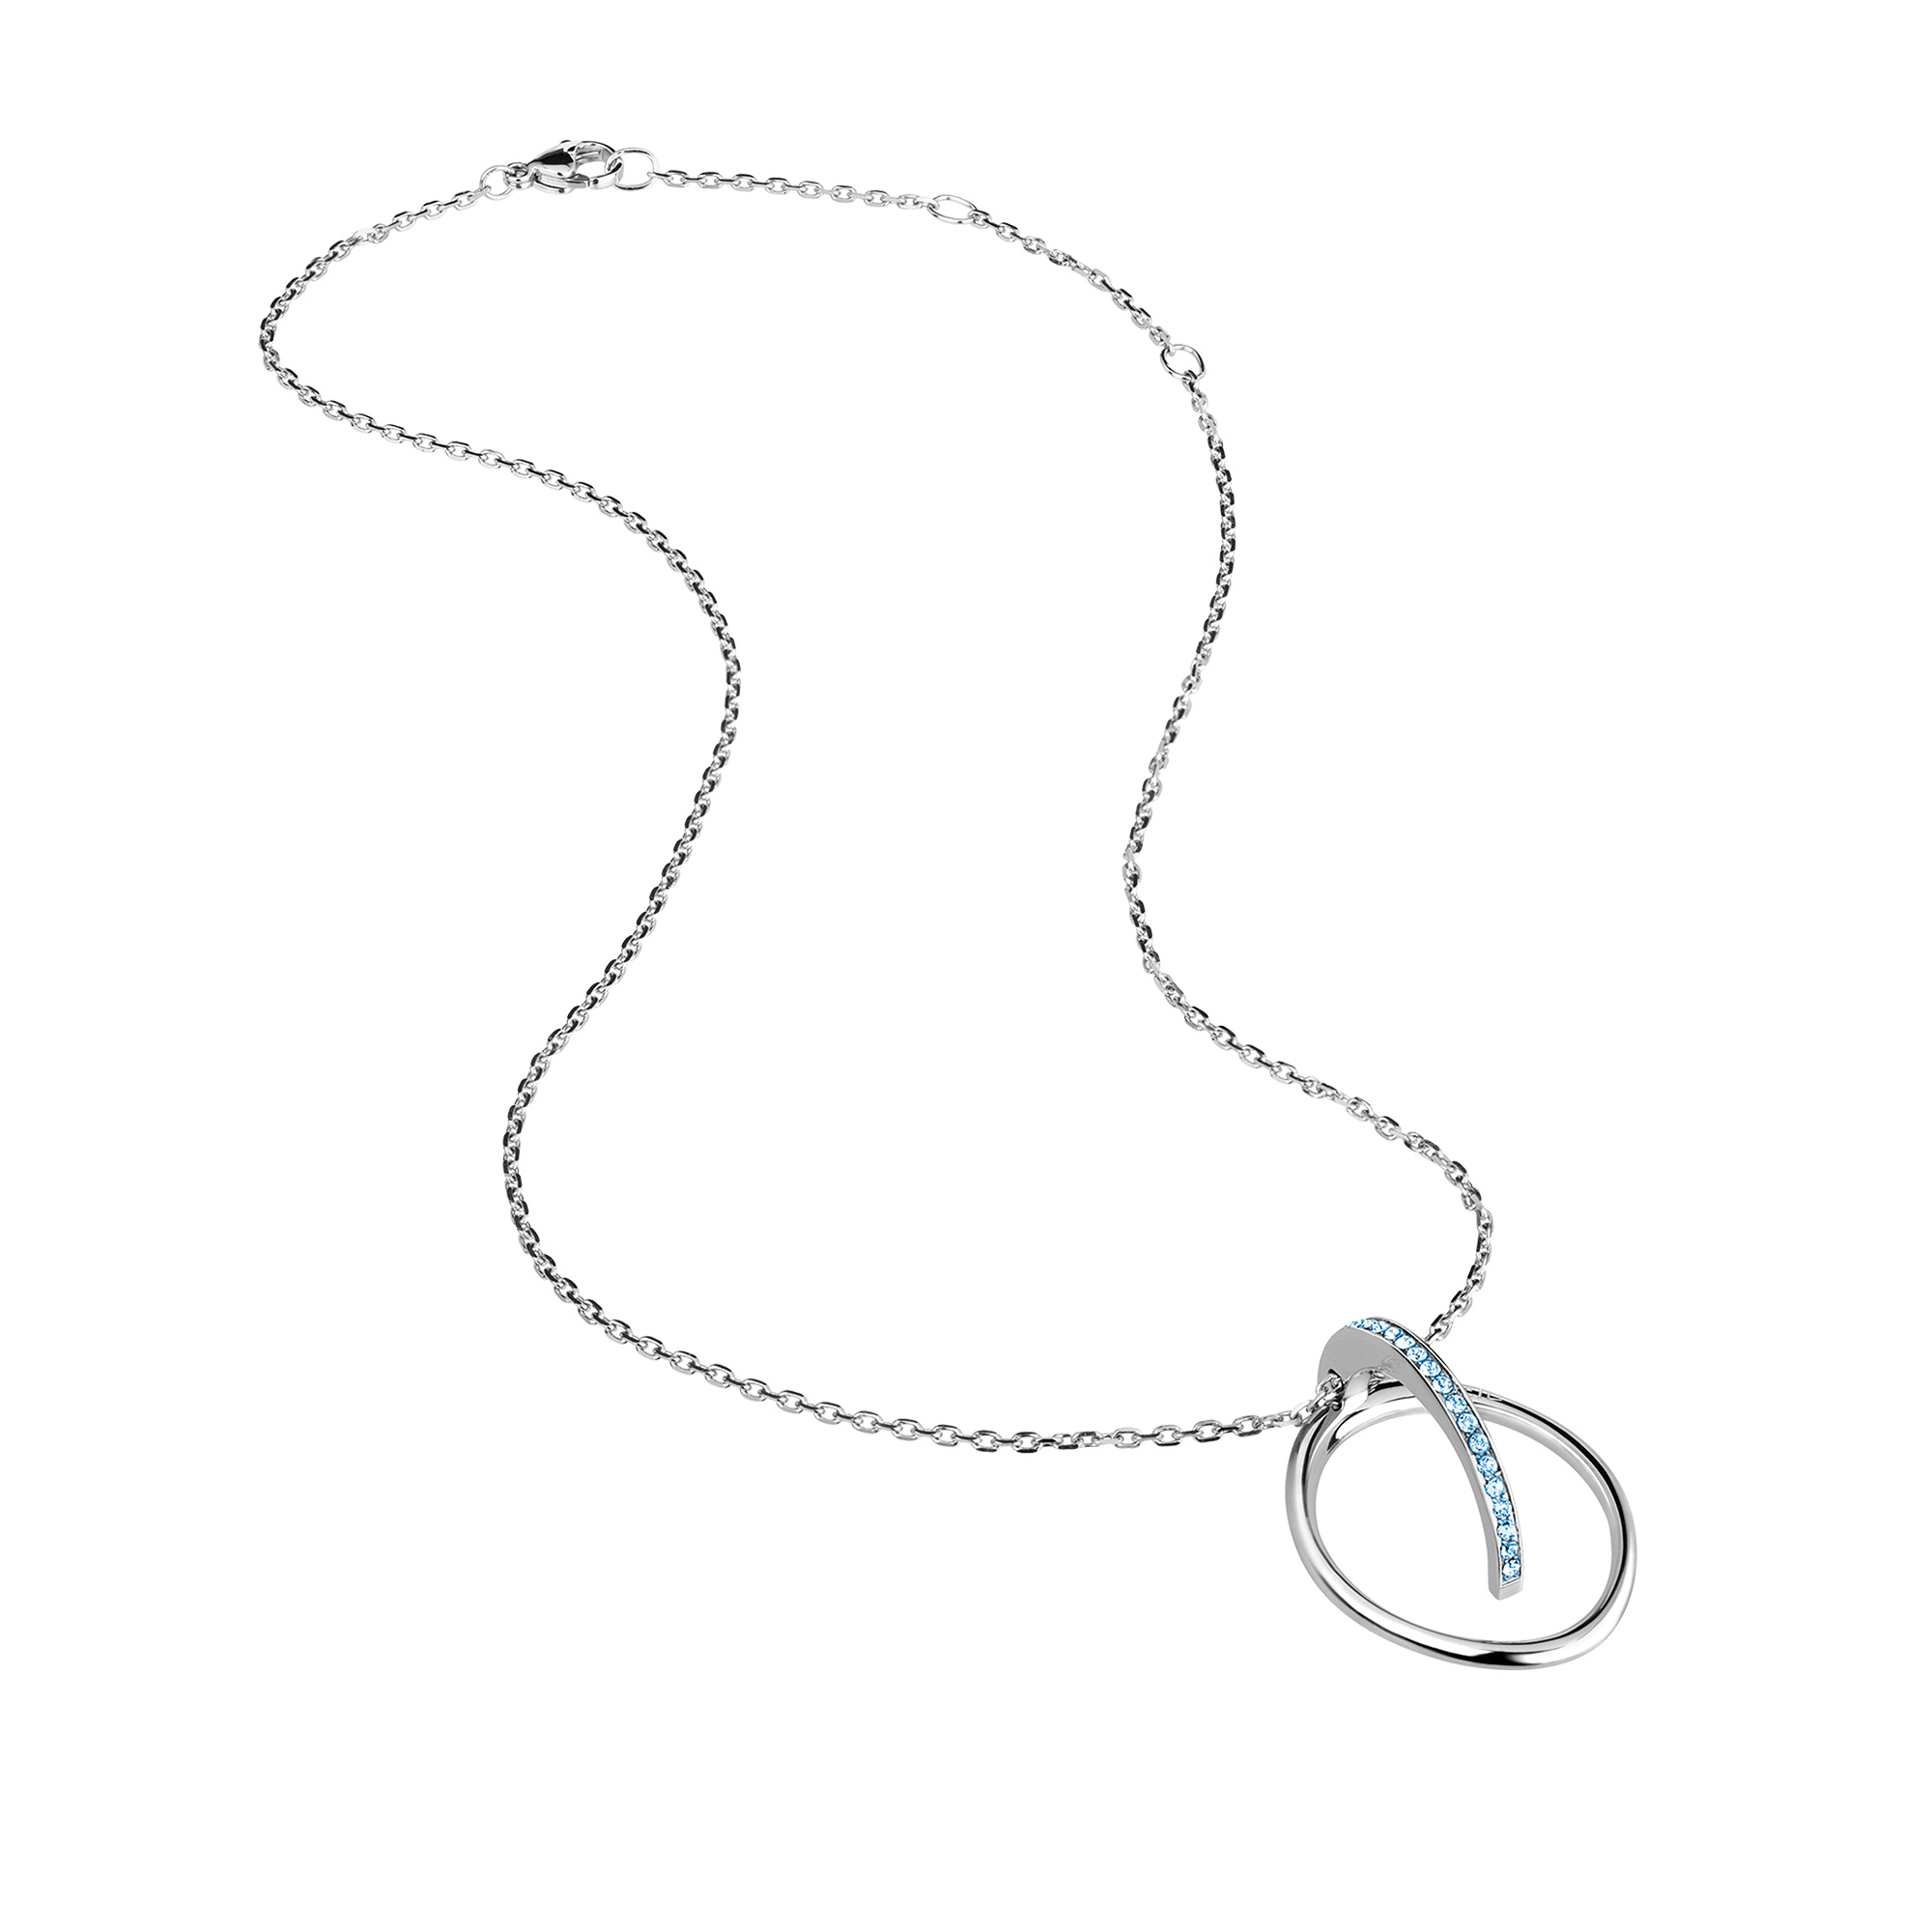 MEZZANOTTE - NECKLACE IN POLISHED STEEL AND BLUE CRYSTALS - 4 - TJ2186 | Breil